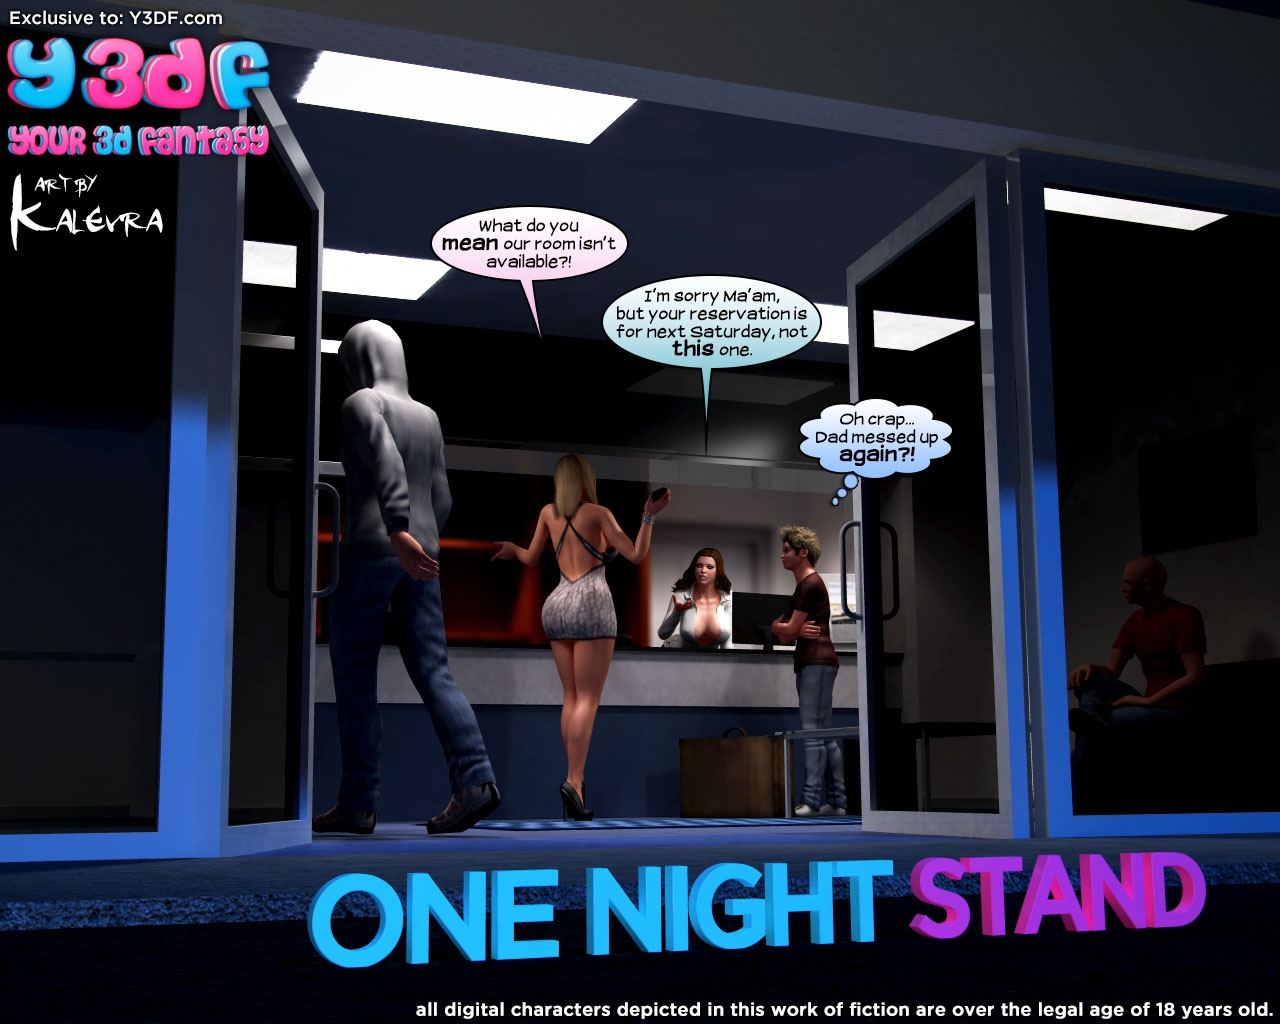 [Y3DF] One Night Stand 0